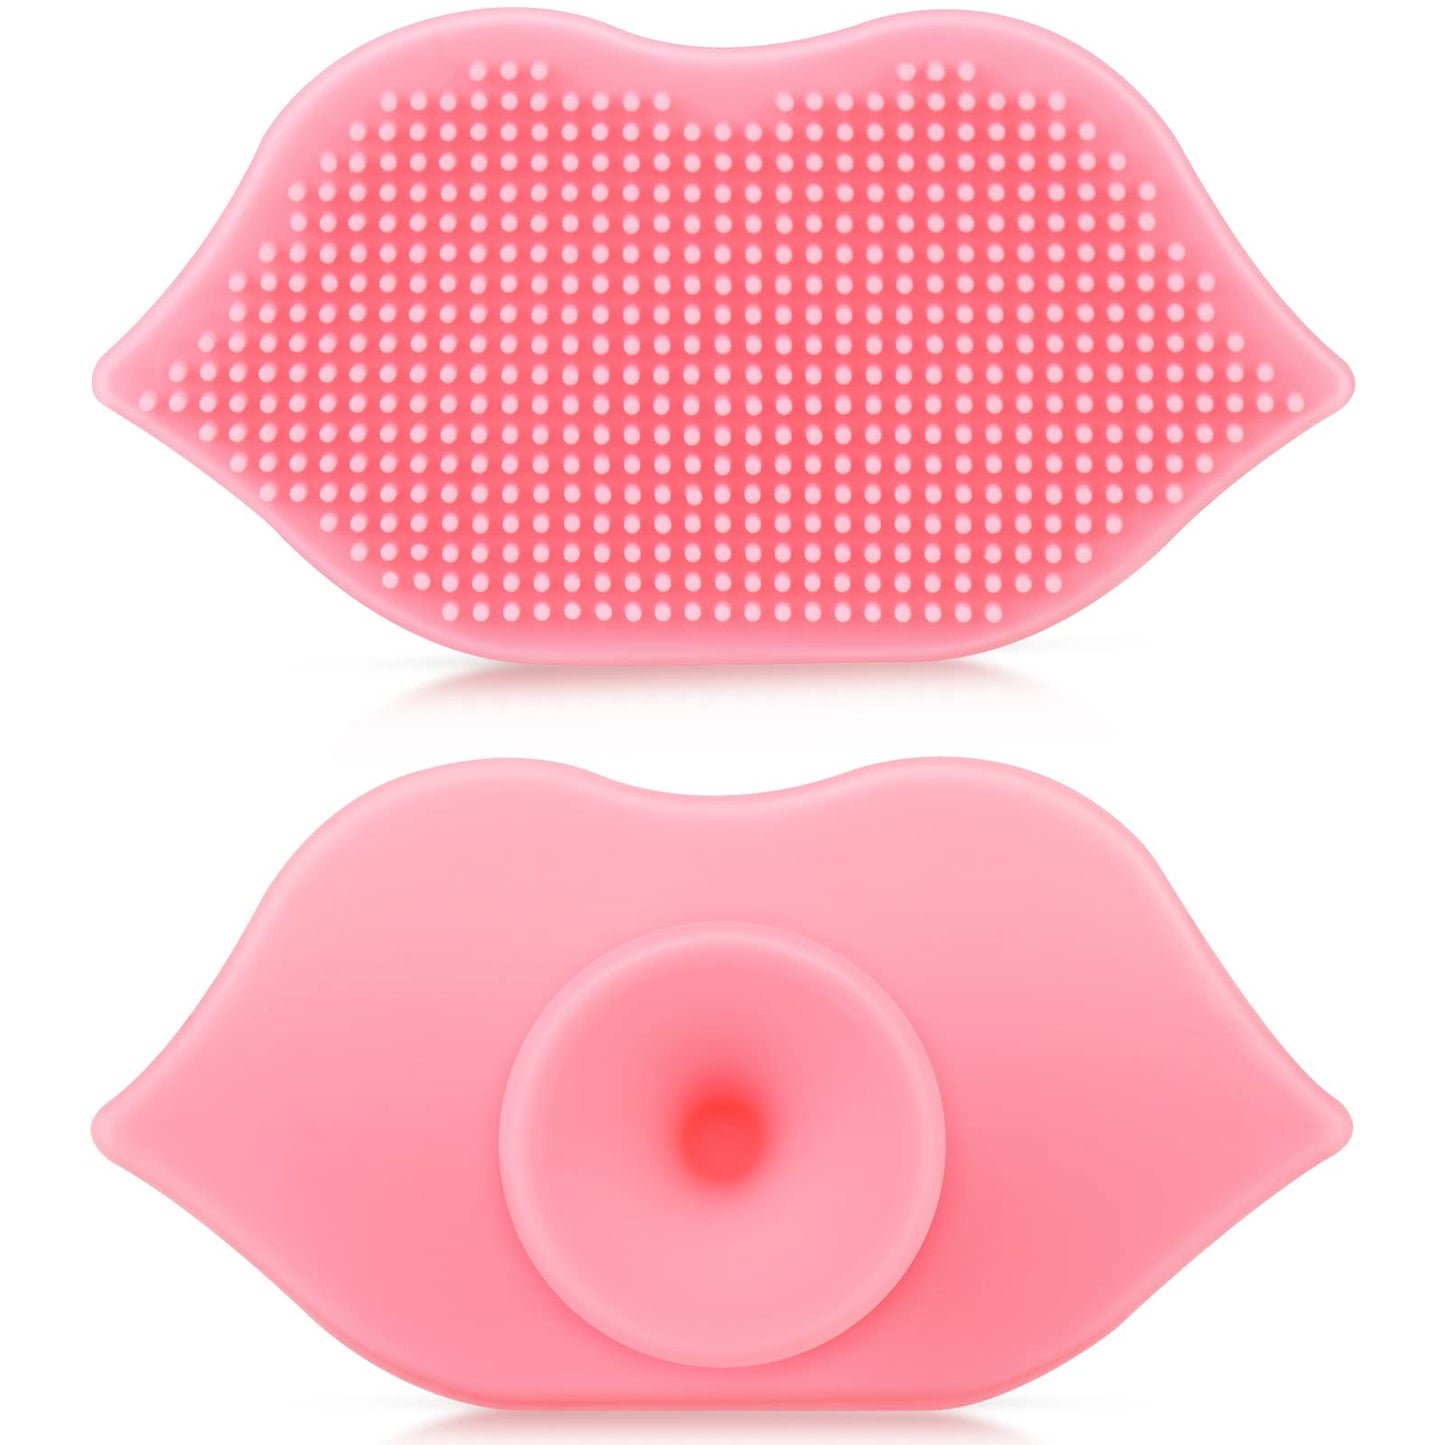 2 Pieces Lip Scrub Brush, Silicone Lip Scrubber and Exfoliating Brush Tool for Men Women Smoother and Fuller Lip Appearance (Color A)